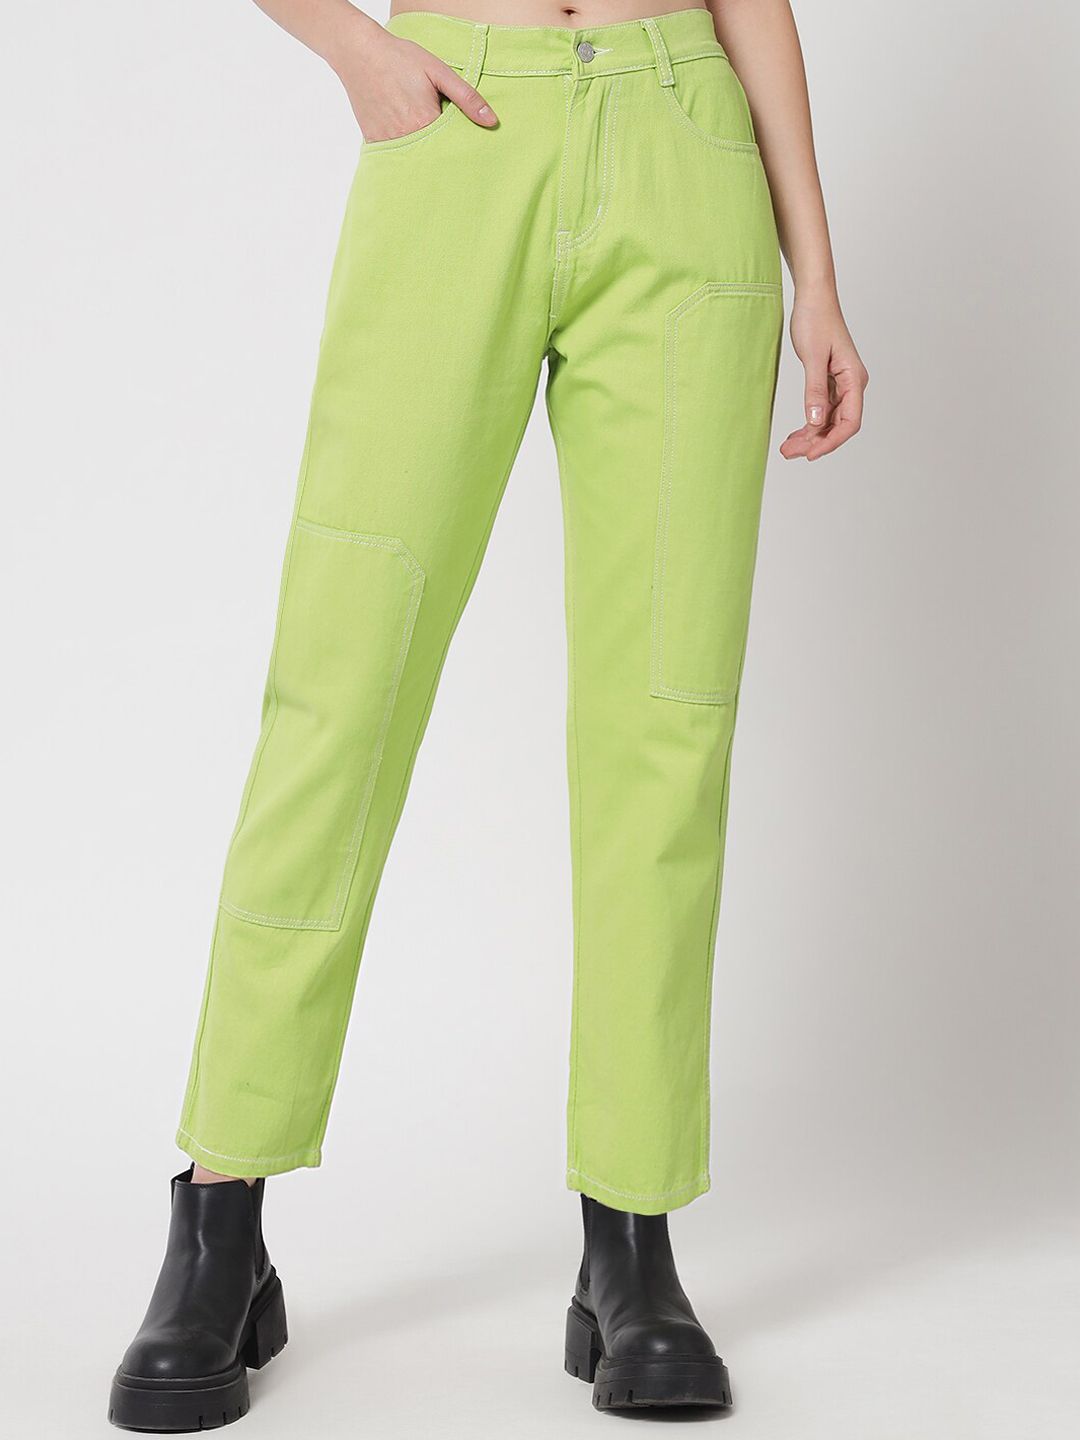 River Of Design Jeans Women Fluorescent Green Boyfriend Fit High-Rise Jeans Price in India